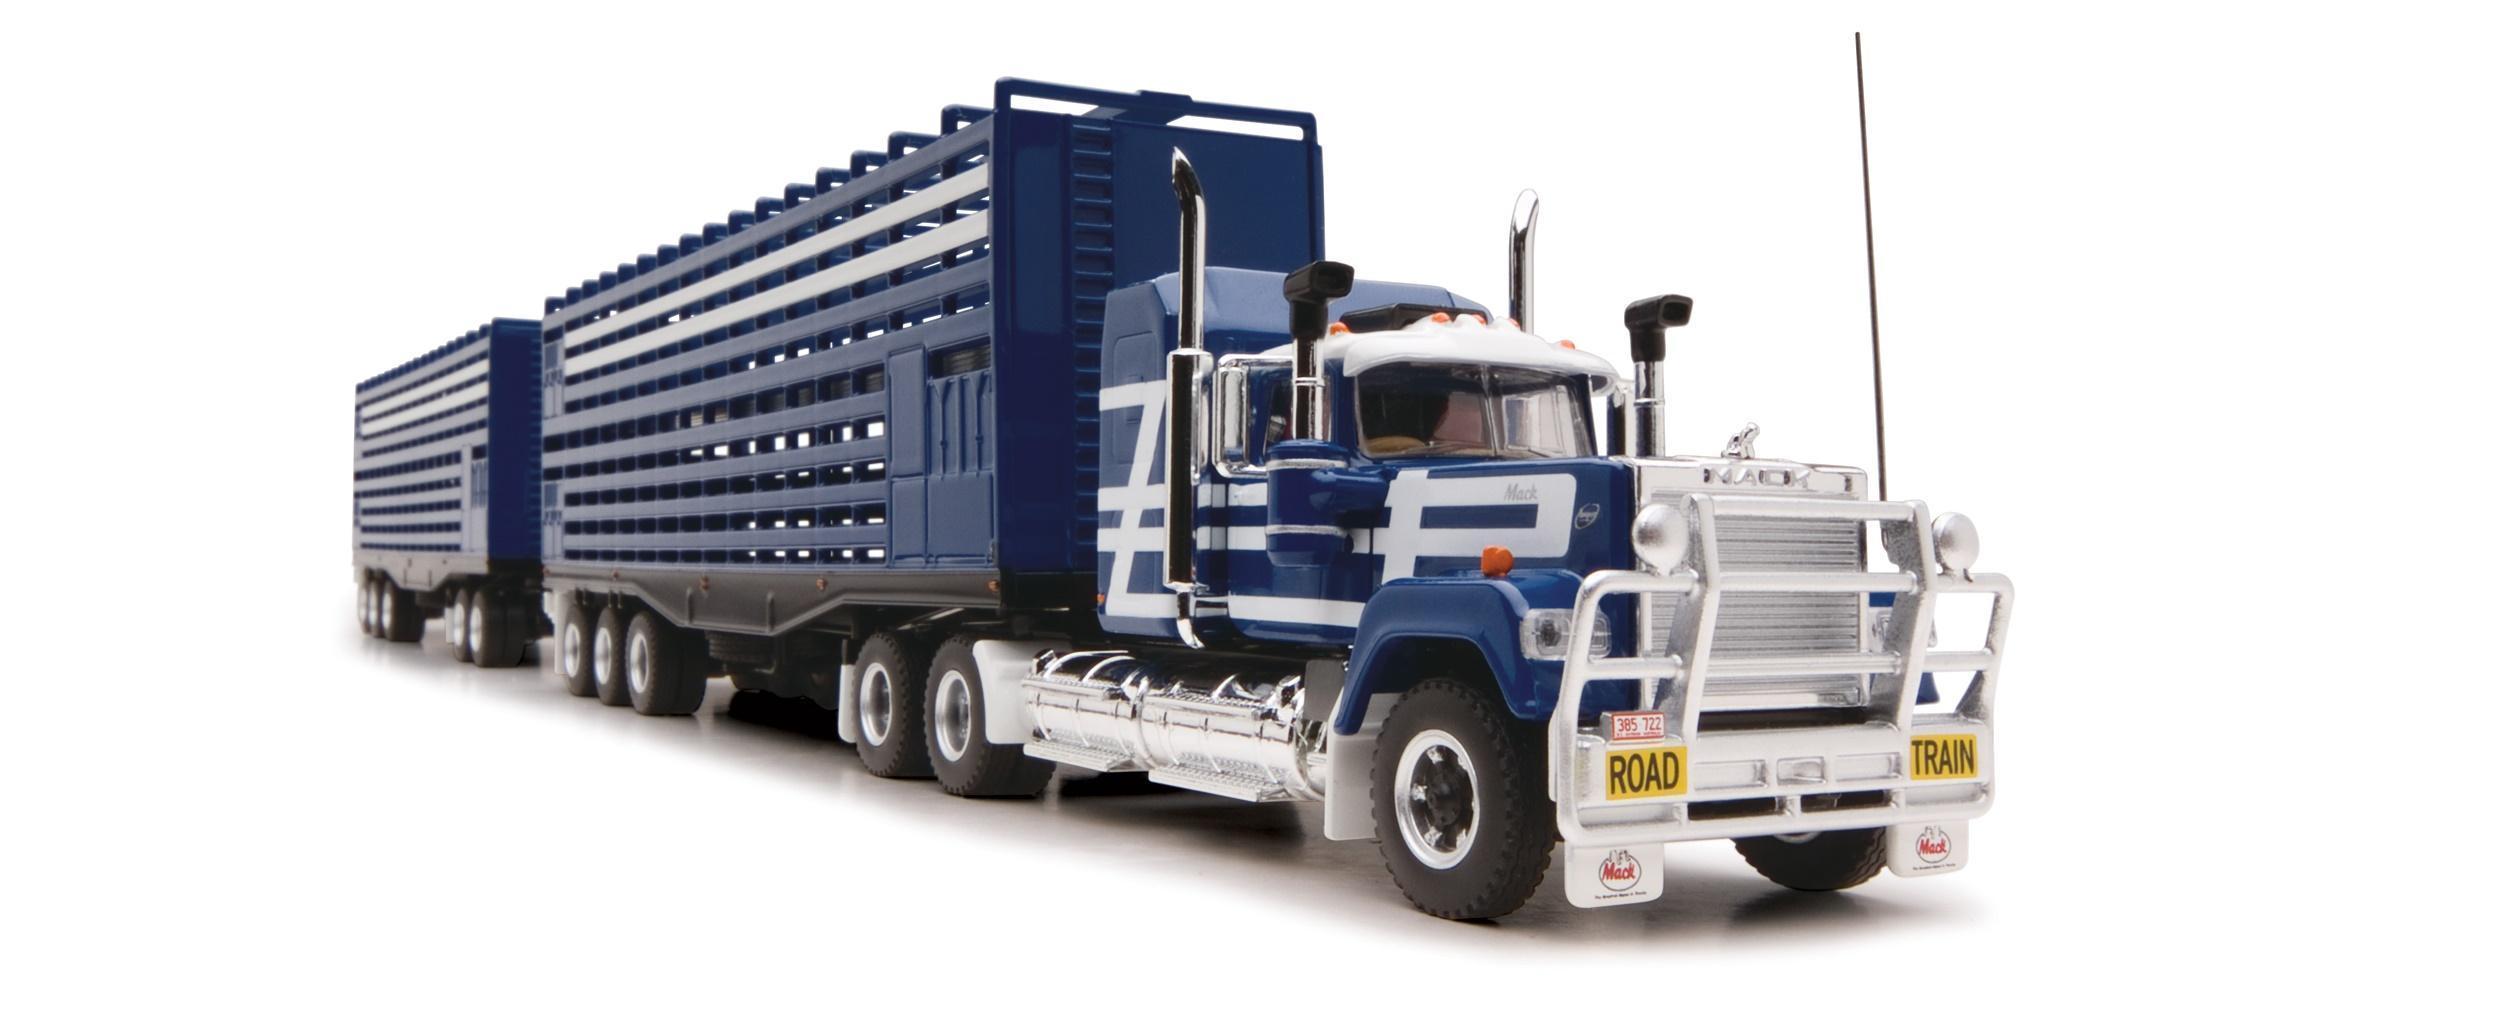 PRE ORDER - Highway Replicas Livestock Road Train Blue & White Die Cast Model Truck With Additional Trailer & Dolly 1:64 (FULL PRICE - $248.00)